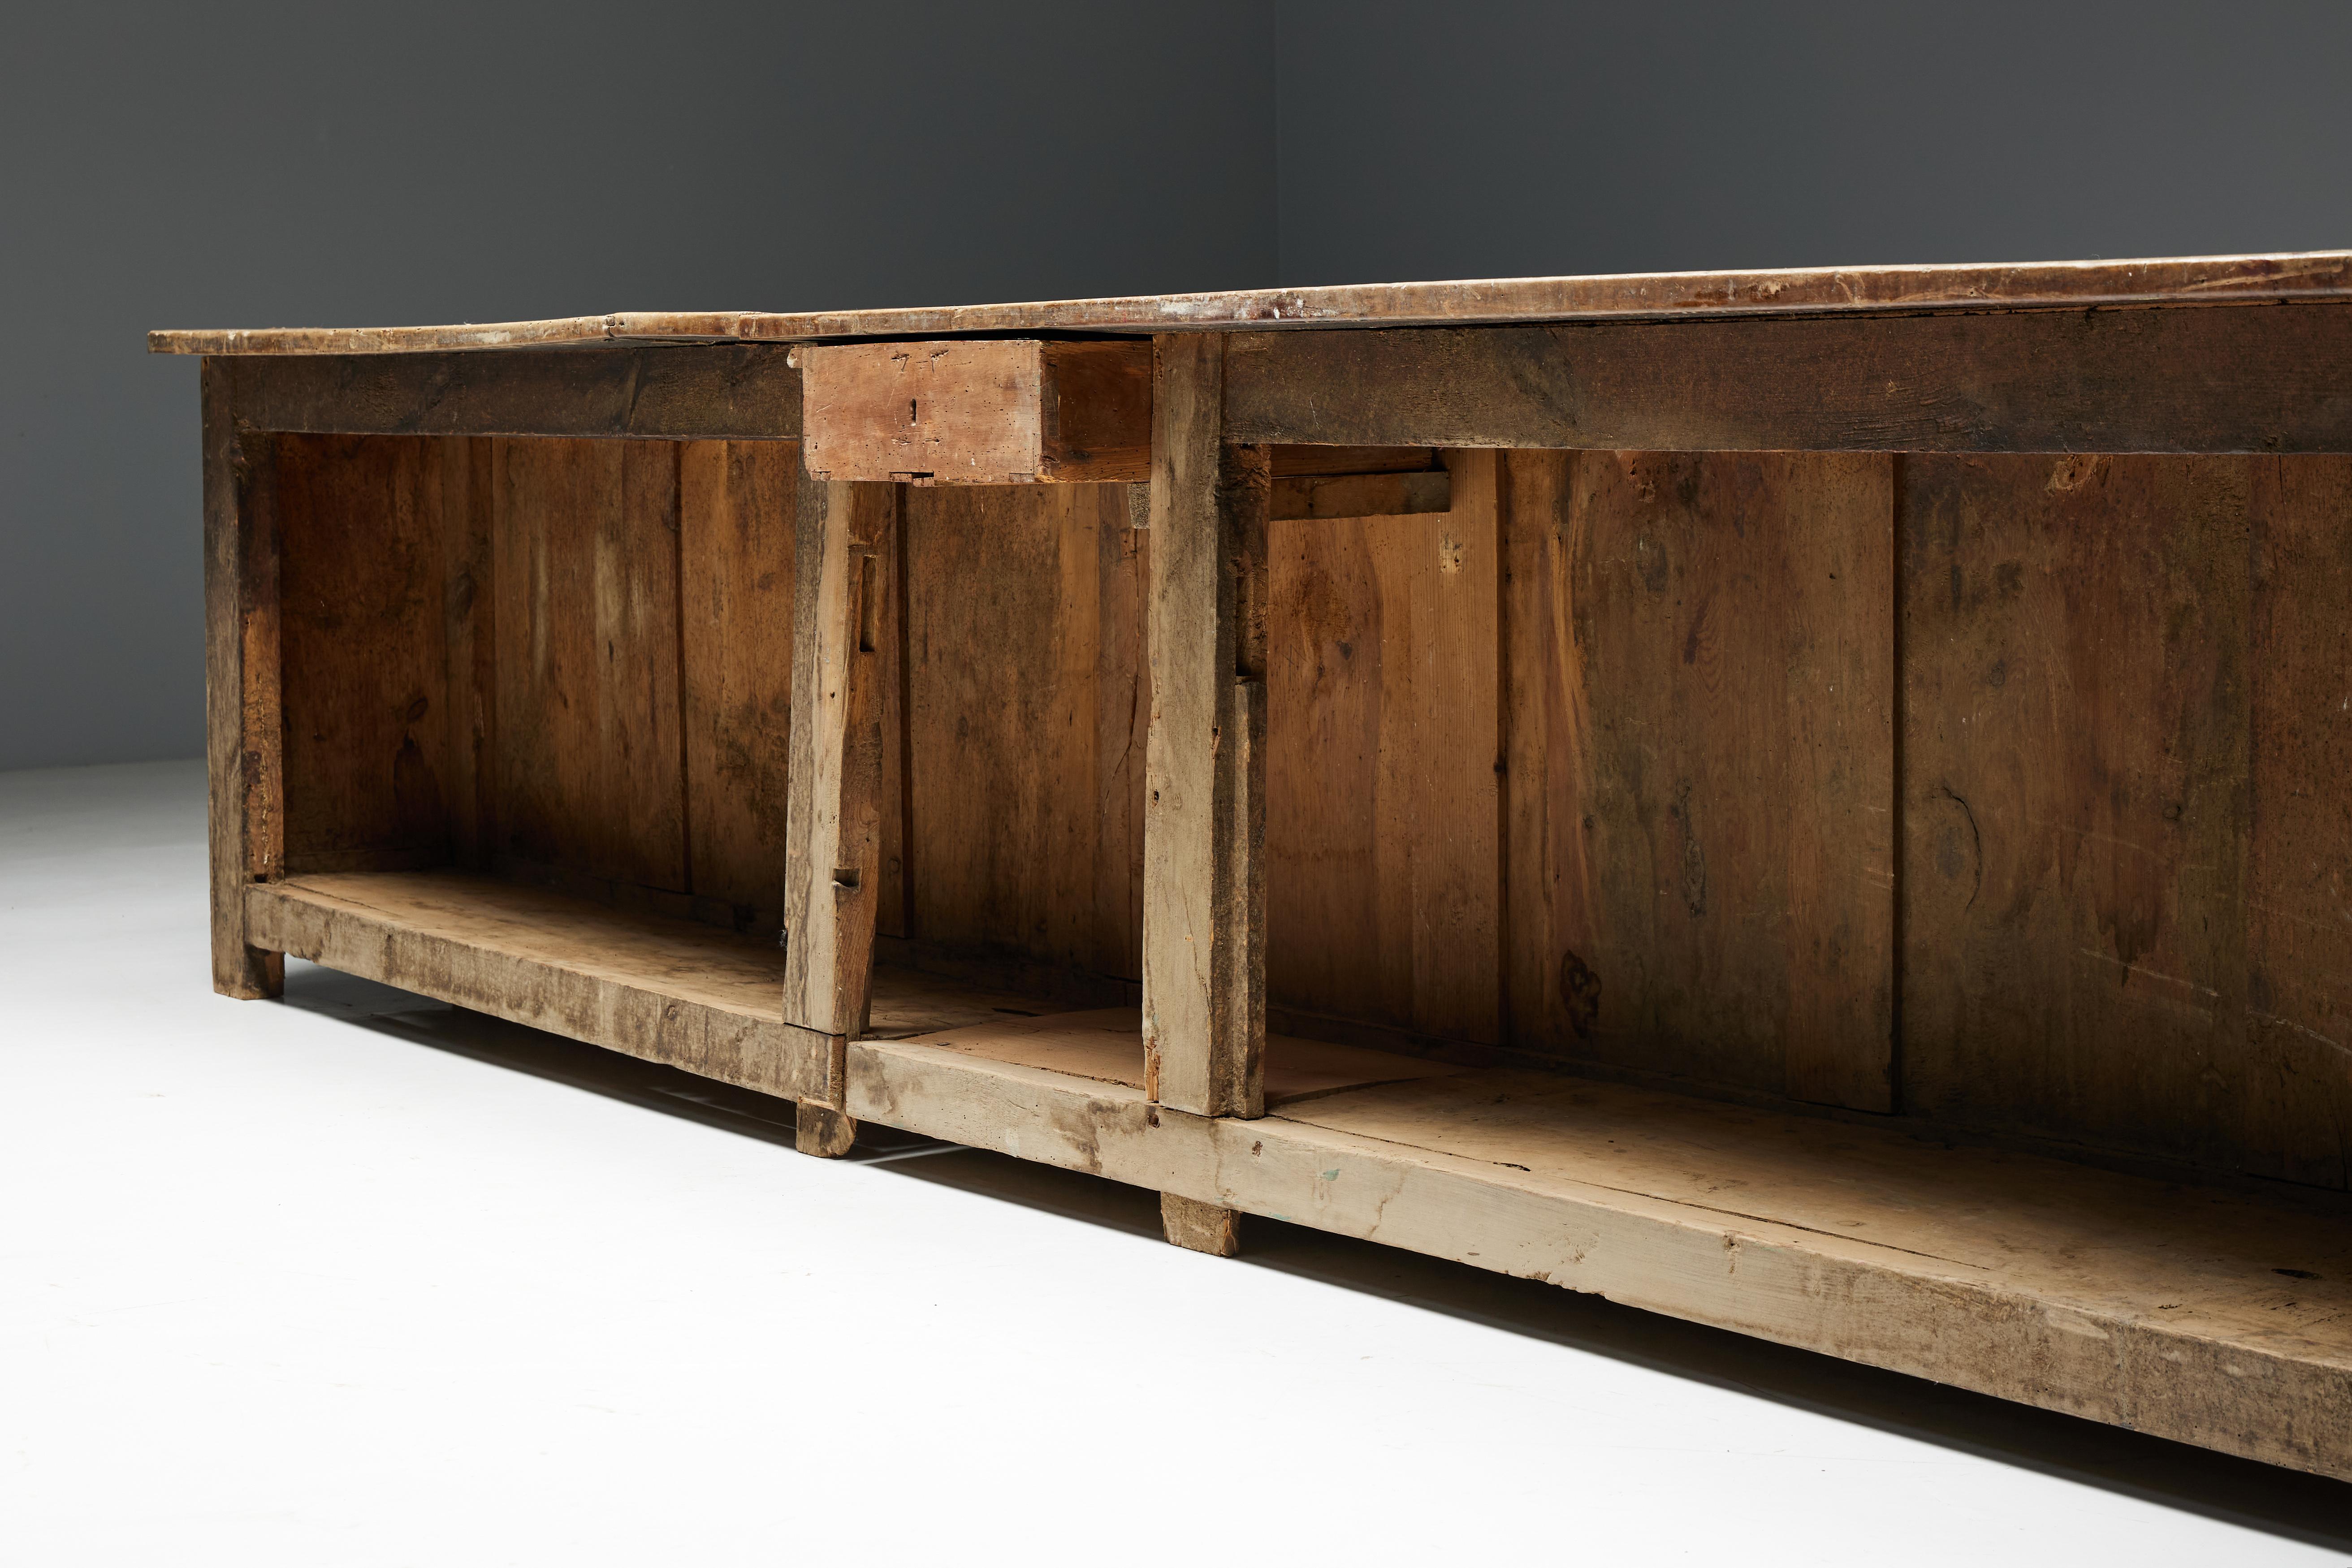 Wood Rustic Art Populaire Freestanding Bar Counter, France, 19th Century